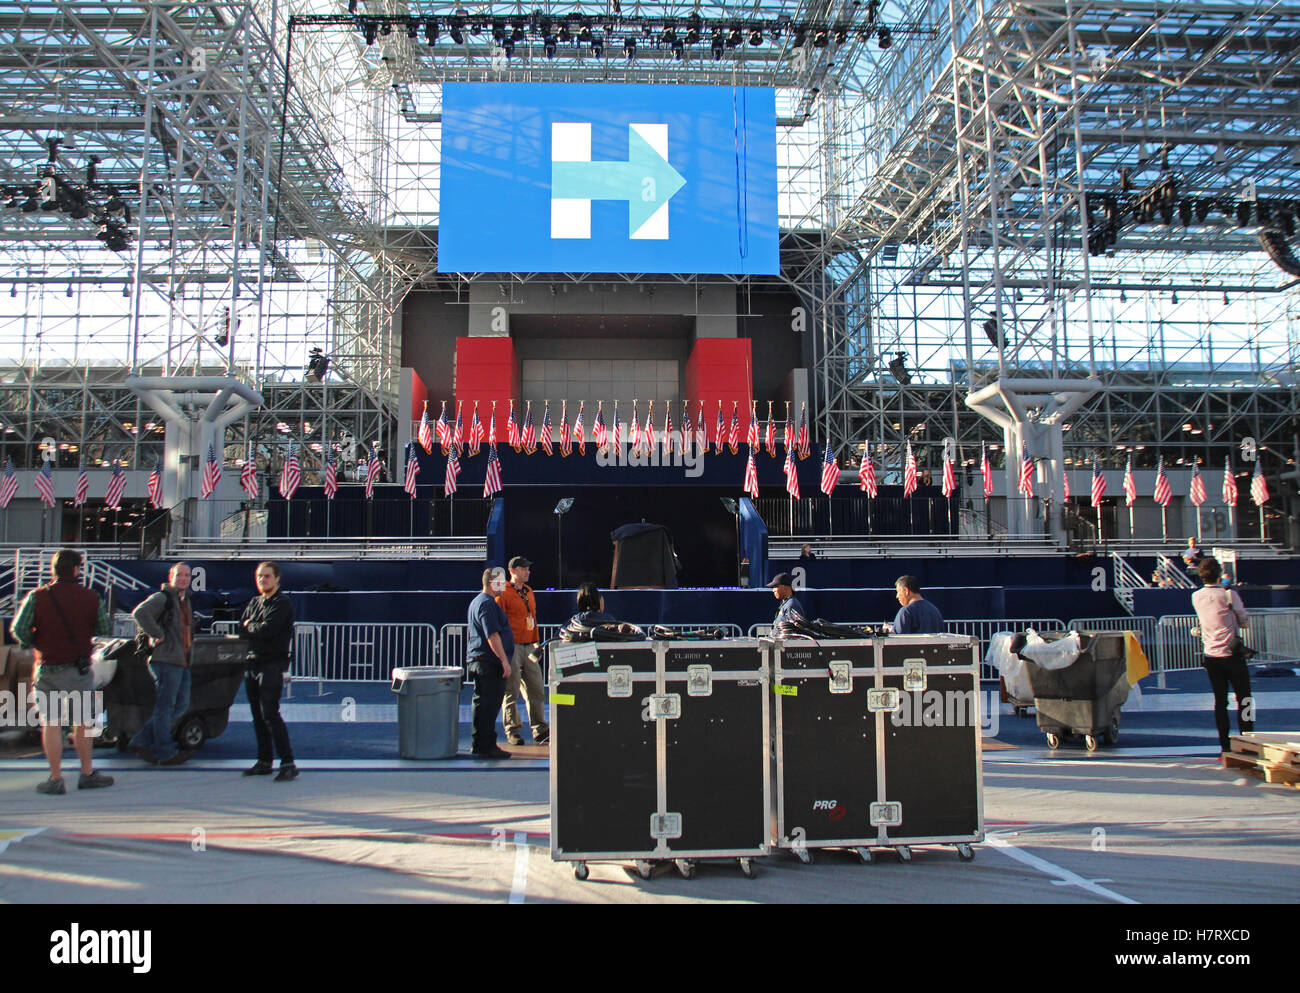 New York, USA. 07th Nov, 2016. The Javits Convention Centre in New York in which the Democratic presidential candidate Hilary Clinton plans to spend election night in New York, USA, 07 November 2016. Photo: Christina Horsten/dpa/Alamy Live News Stock Photo